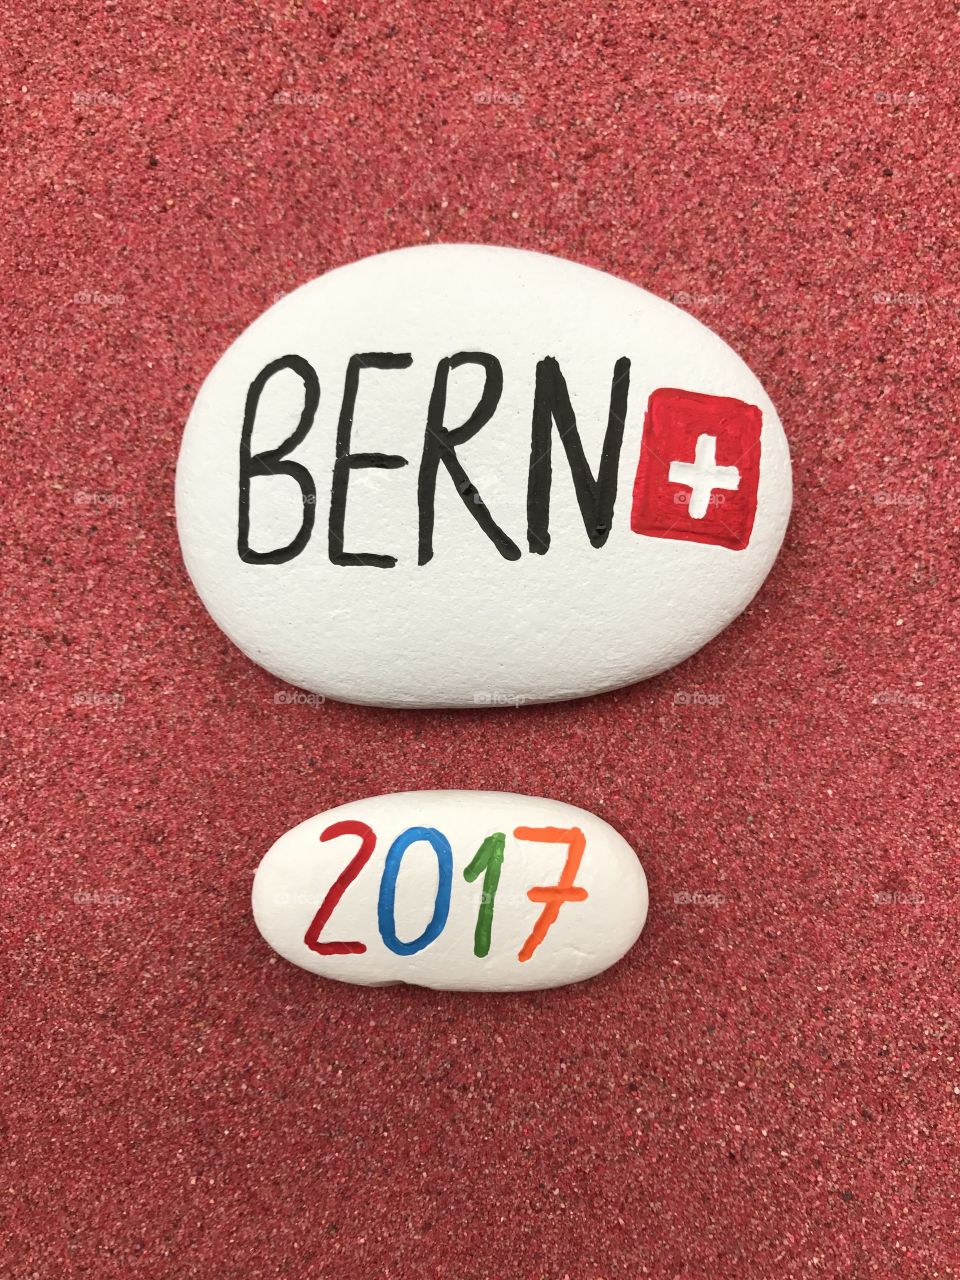 Bern 2017 on carved and colored stones over red sand 